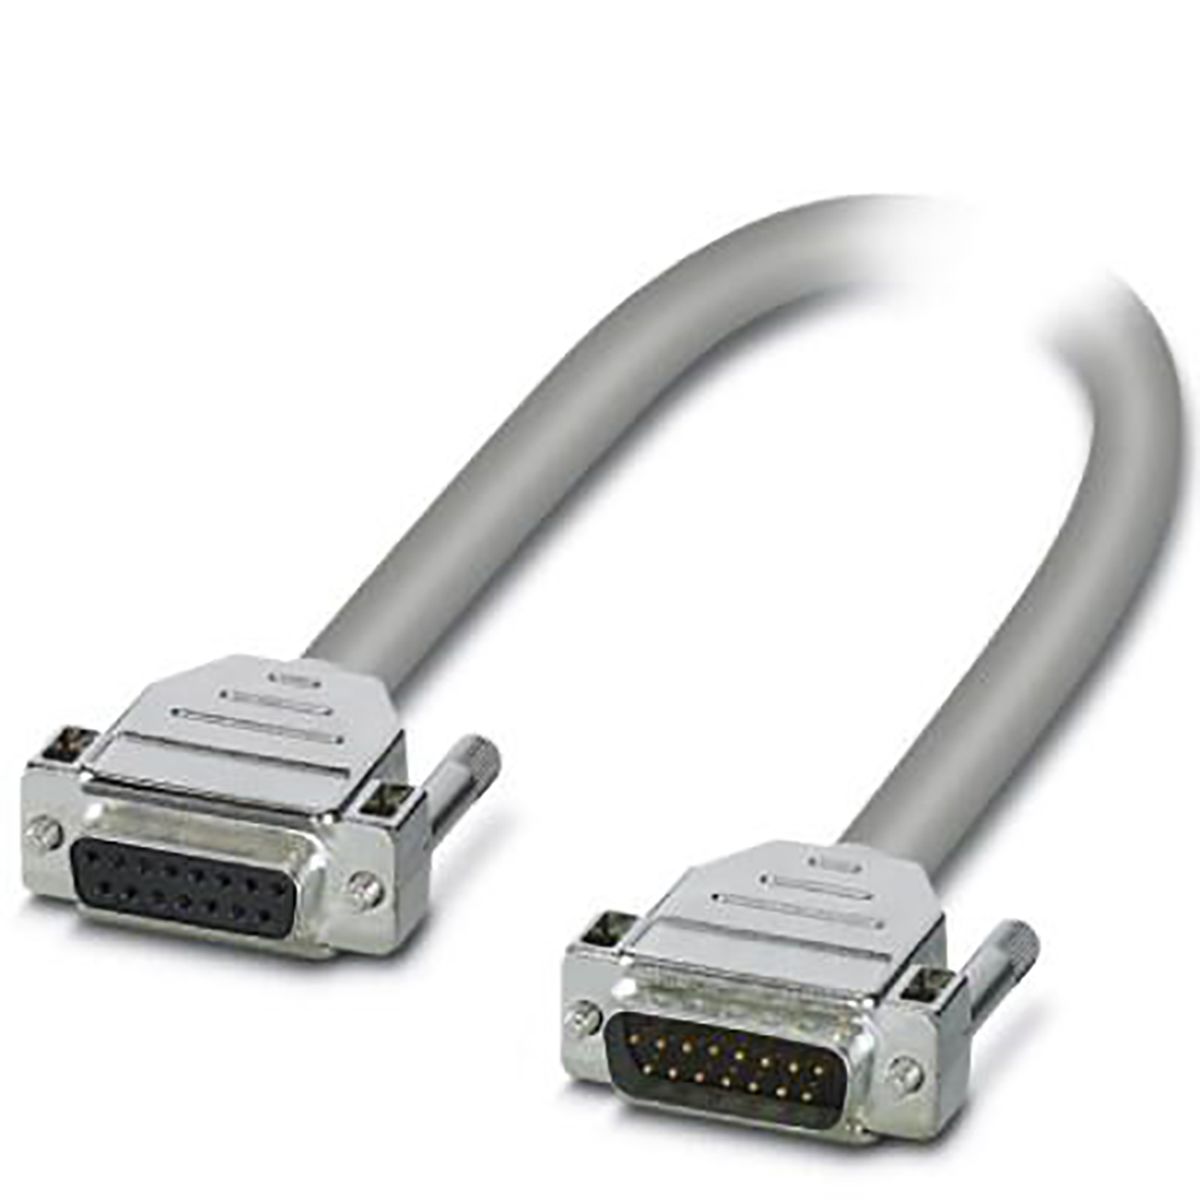 Phoenix Contact 1m 15 pin D-sub to 15 pin D-sub Serial Cable